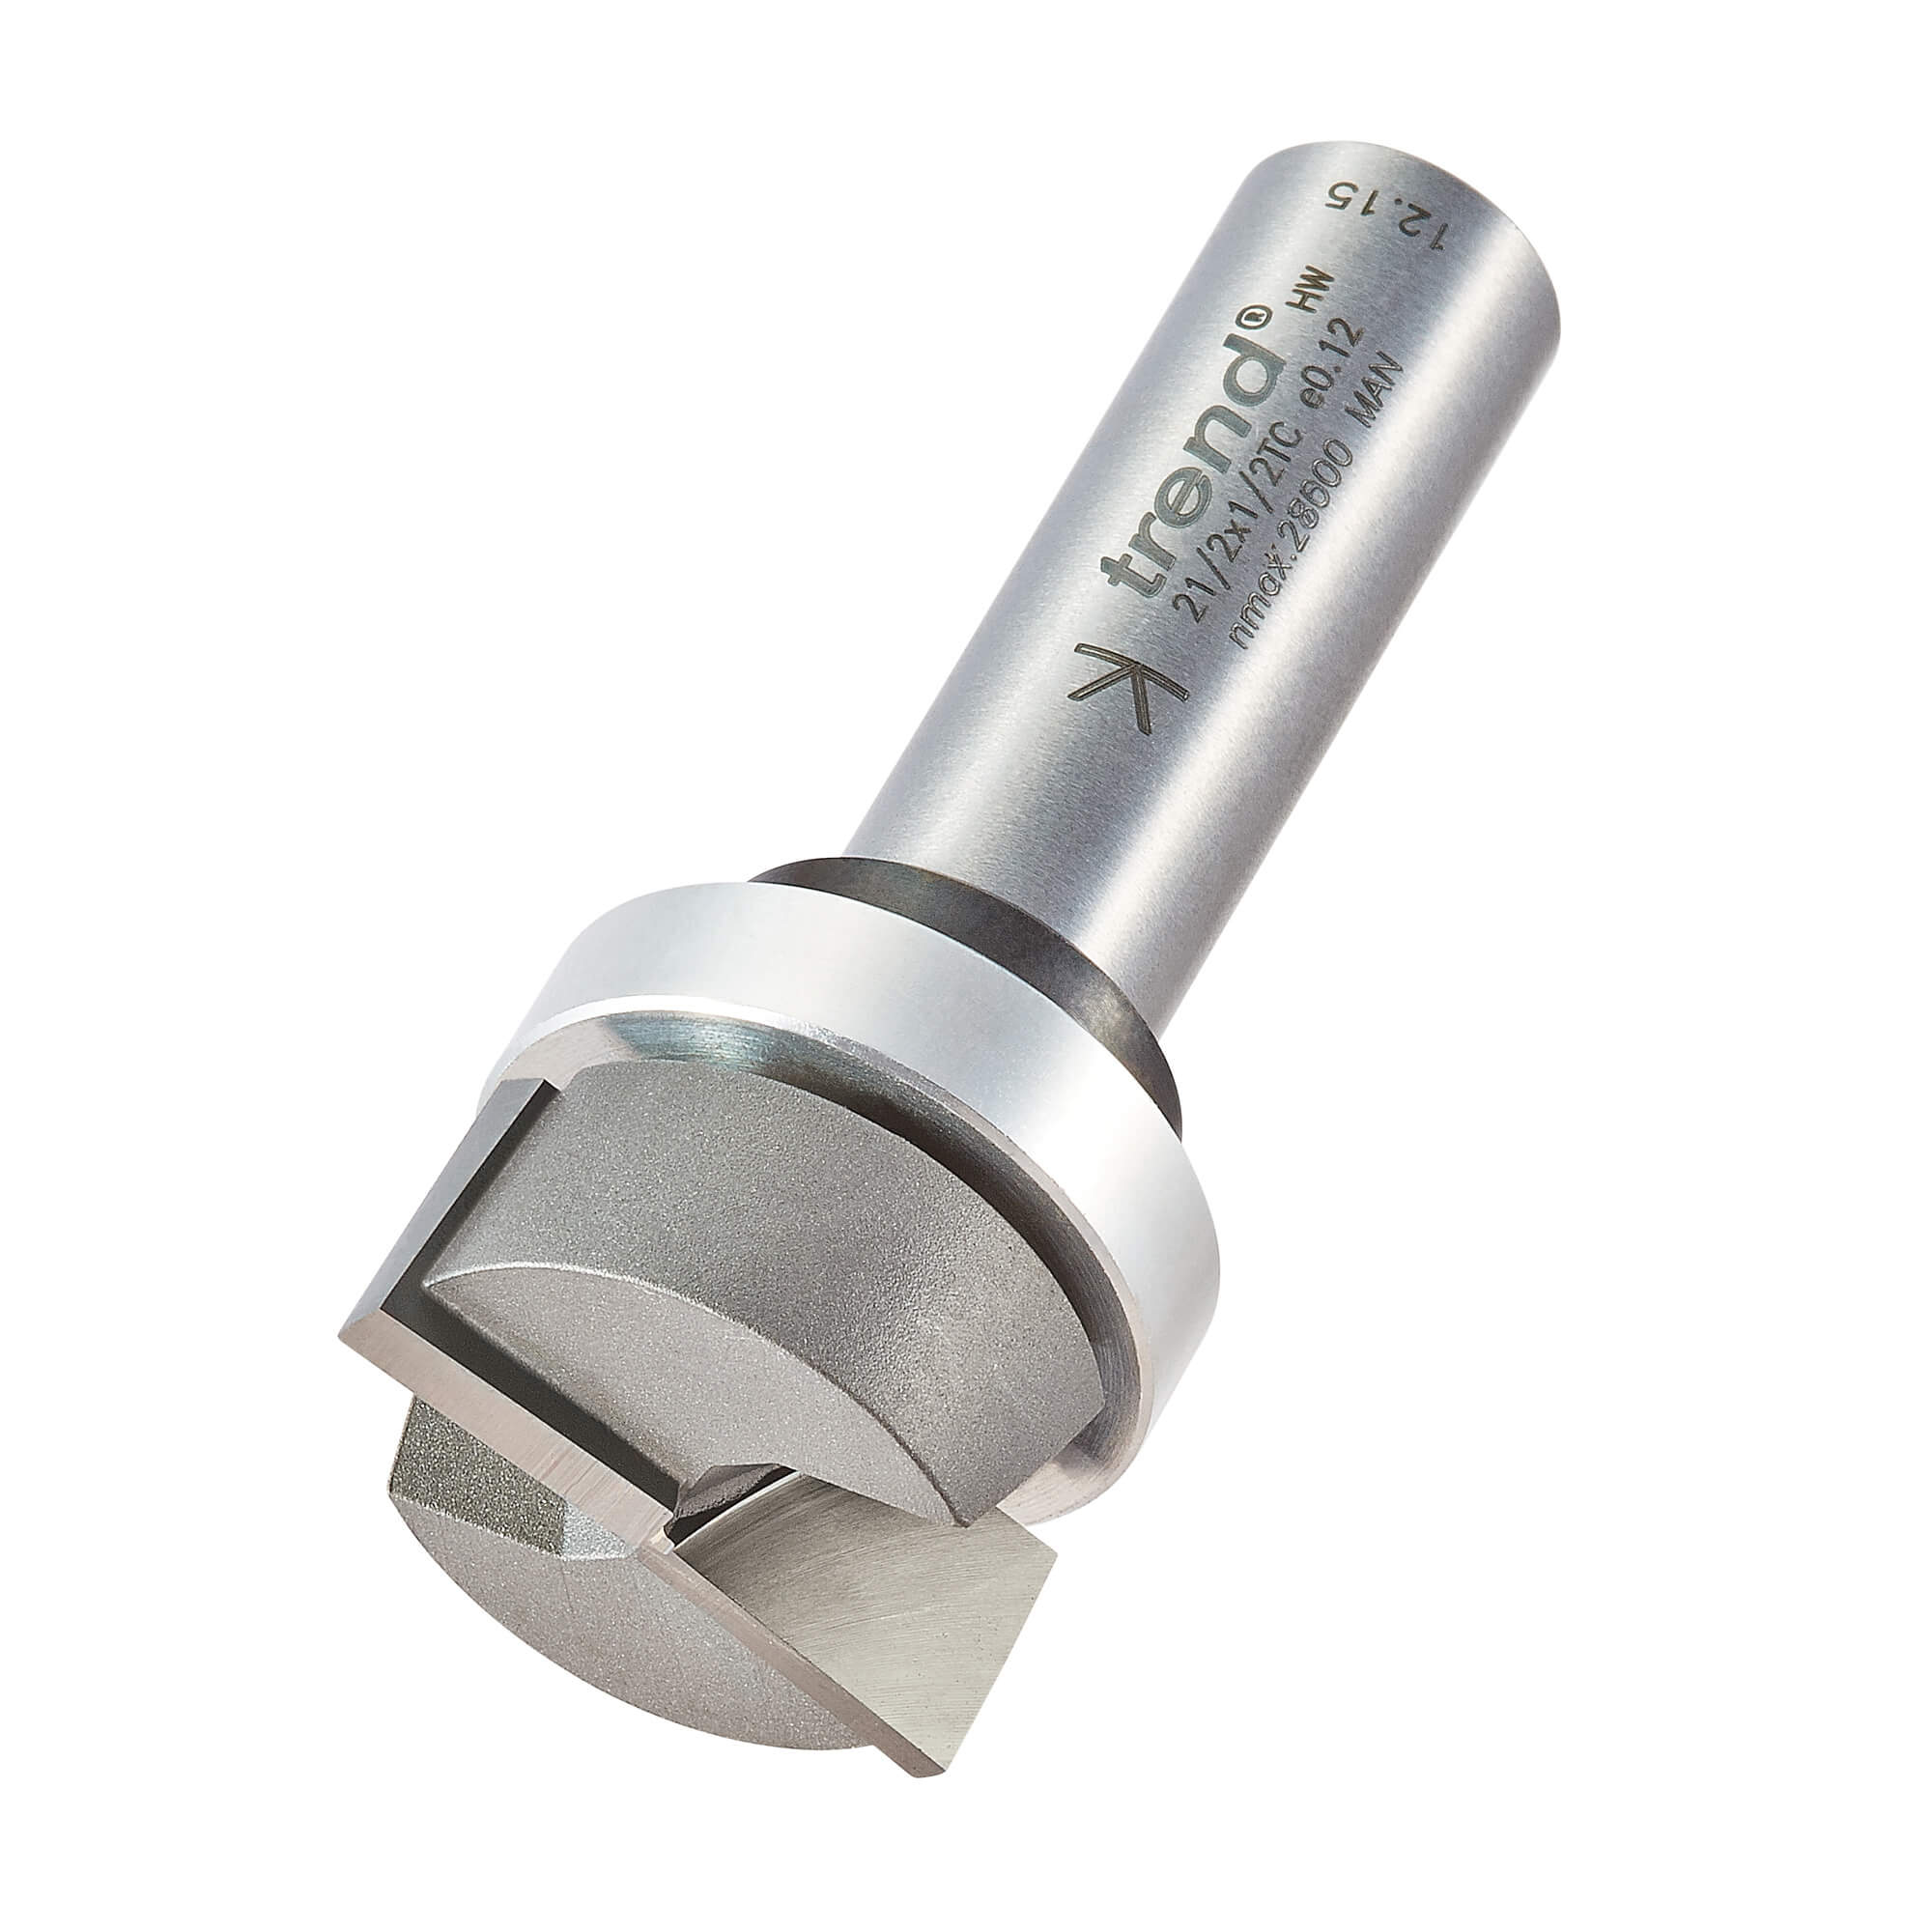 Image of Trend Bearing Guided Housing Router Cutter 25.4mm 11.1mm 1/4"